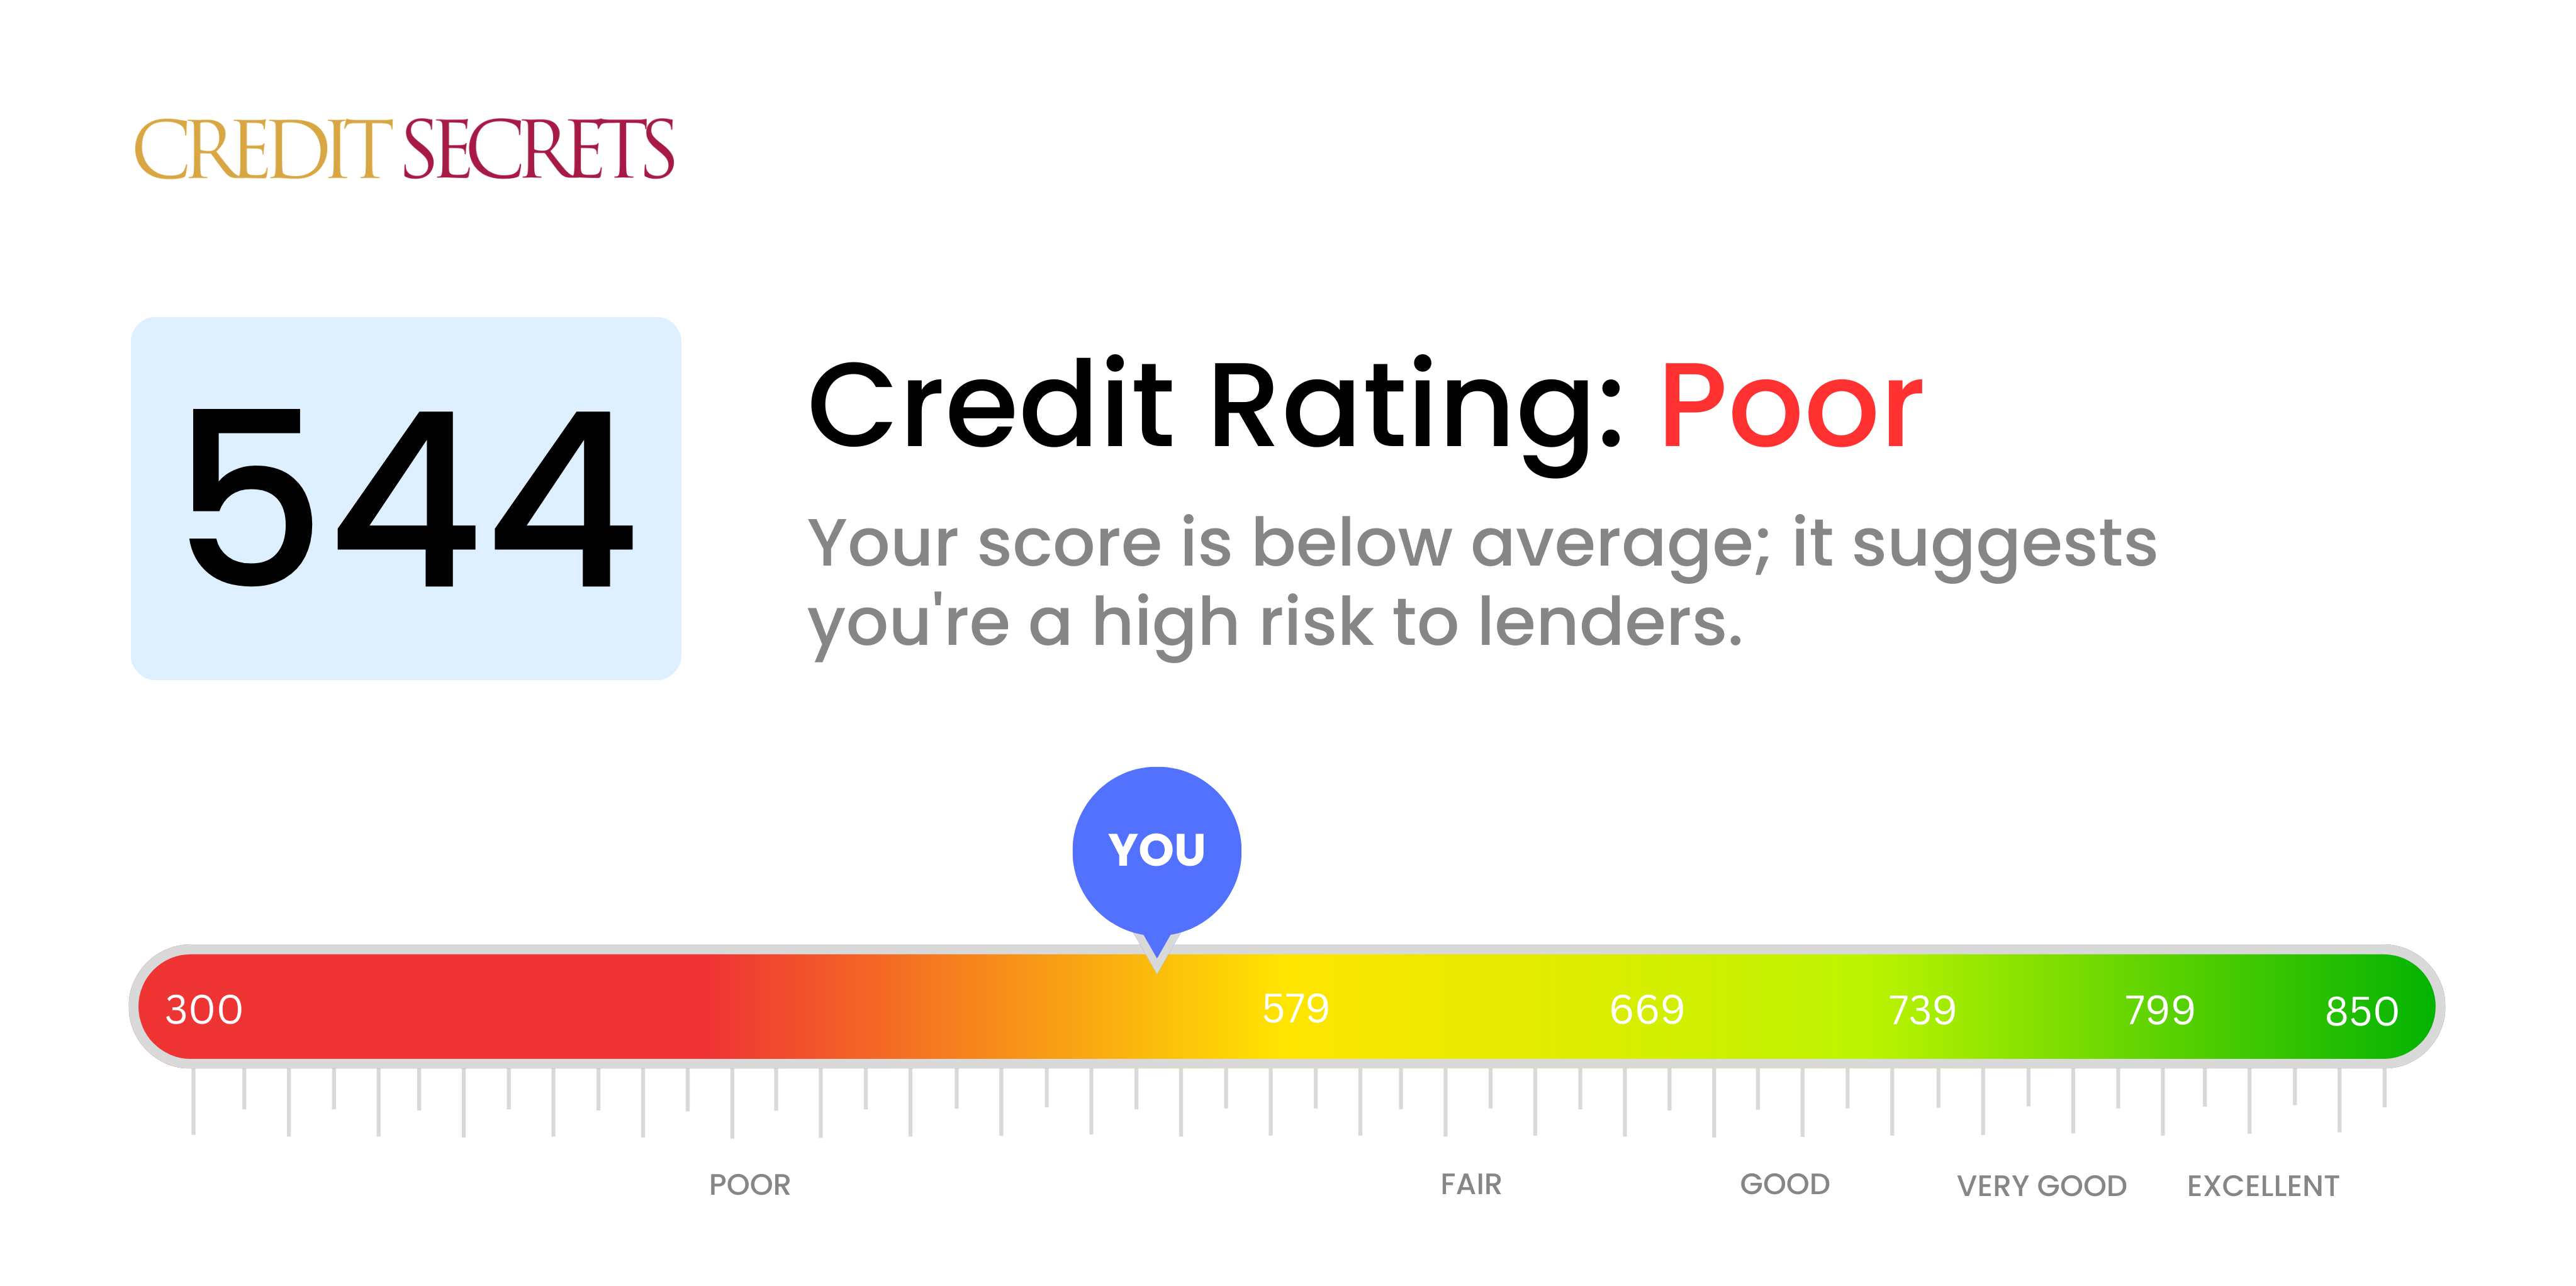 Is 544 a good credit score?